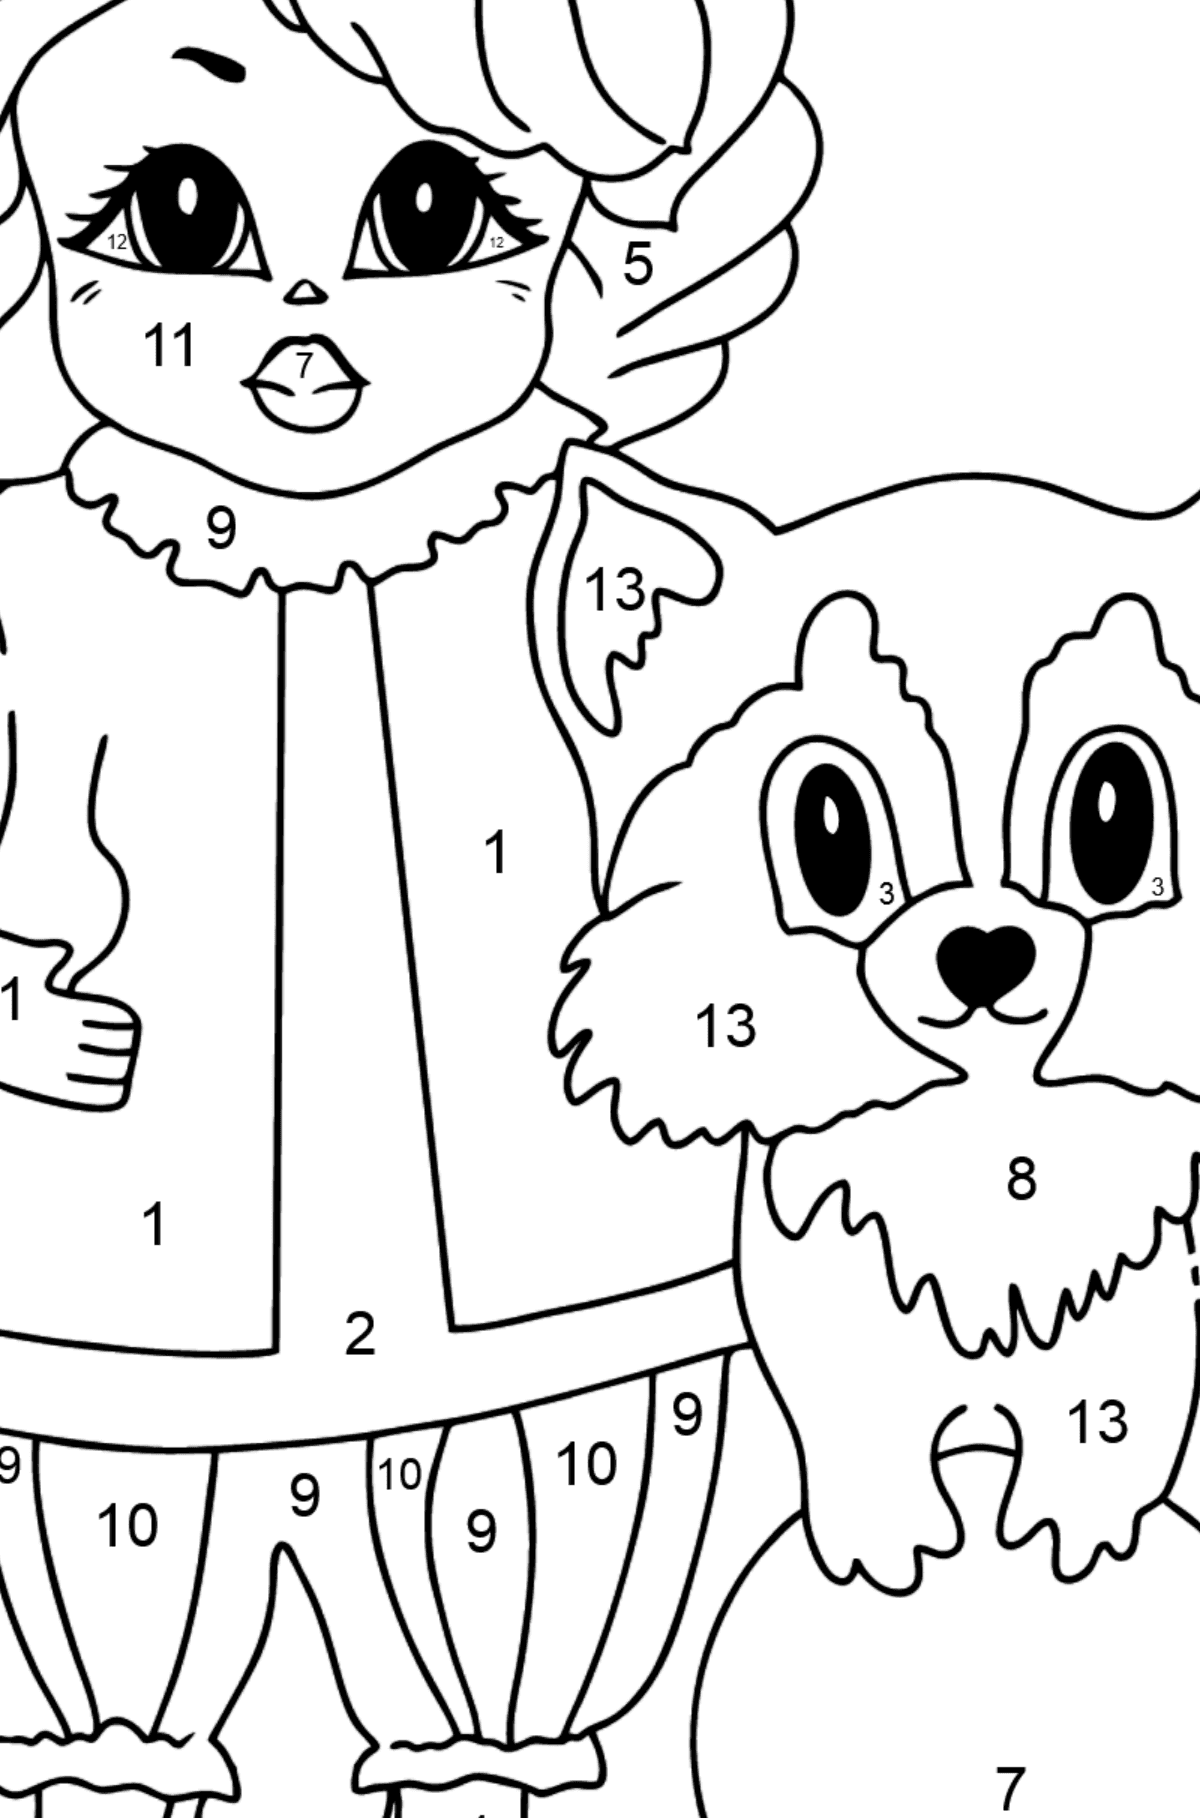 Coloring Page - A Princess with a Cat and a Racoon - Coloring by Numbers for Kids